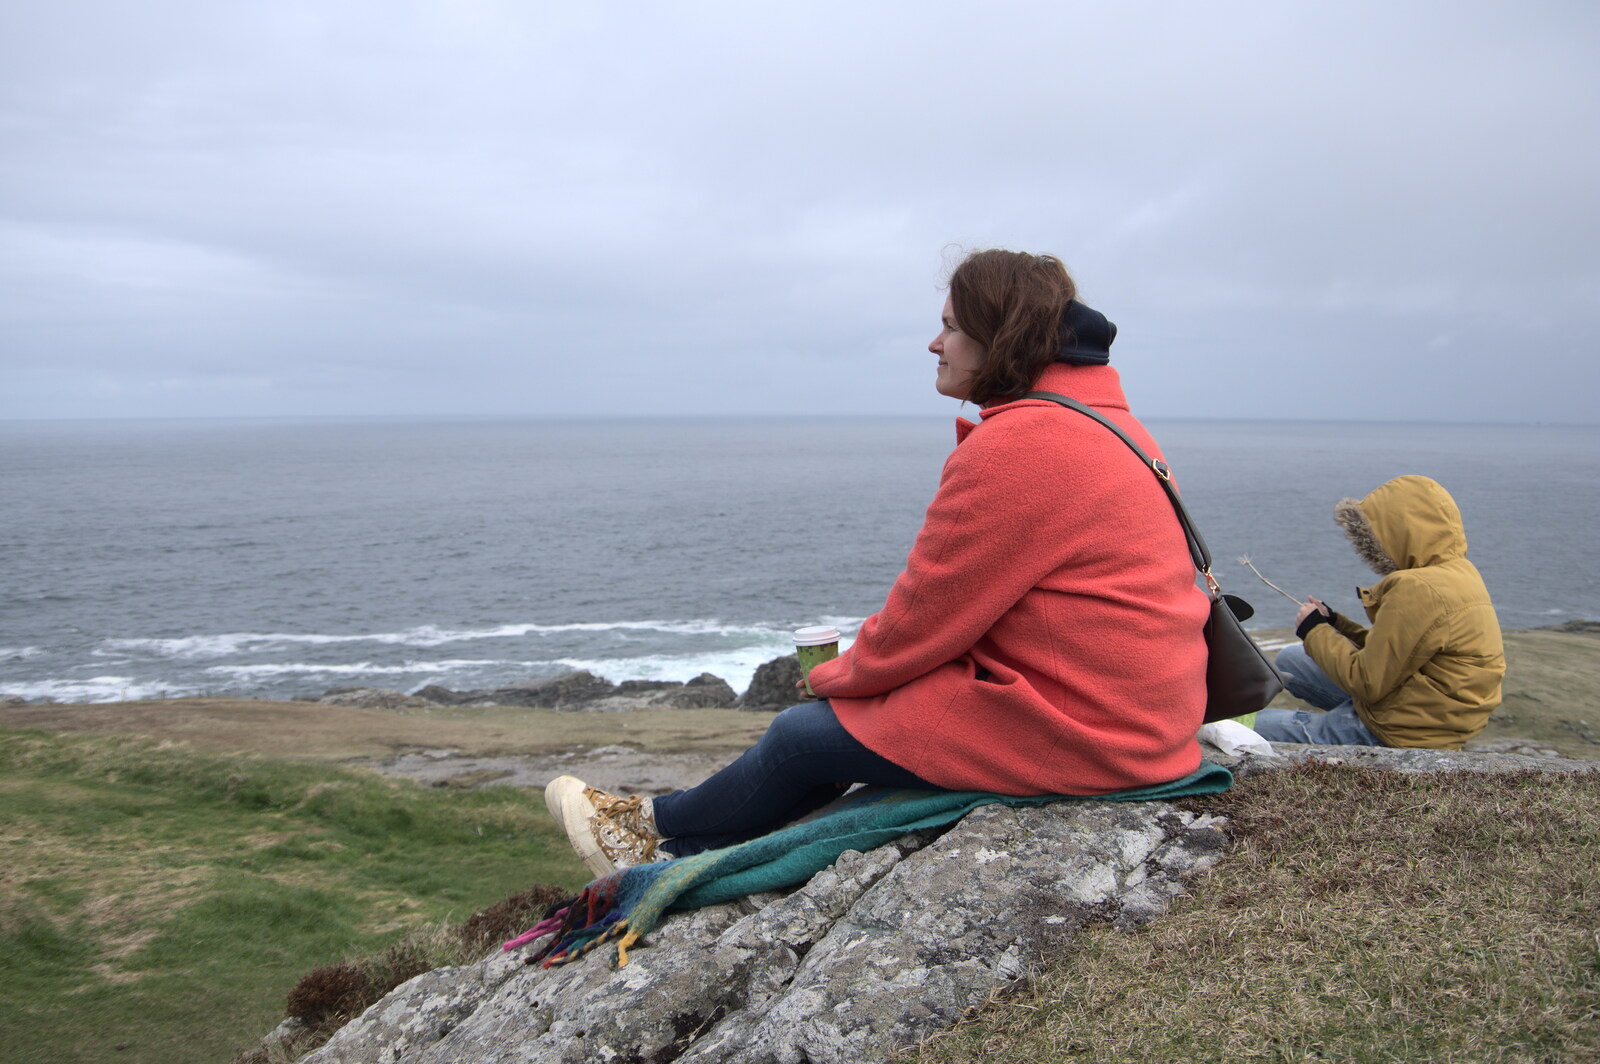 Greencastle, Doagh and Malin Head, County Donegal, Ireland - 19th April 2022: Isobel looks out to sea